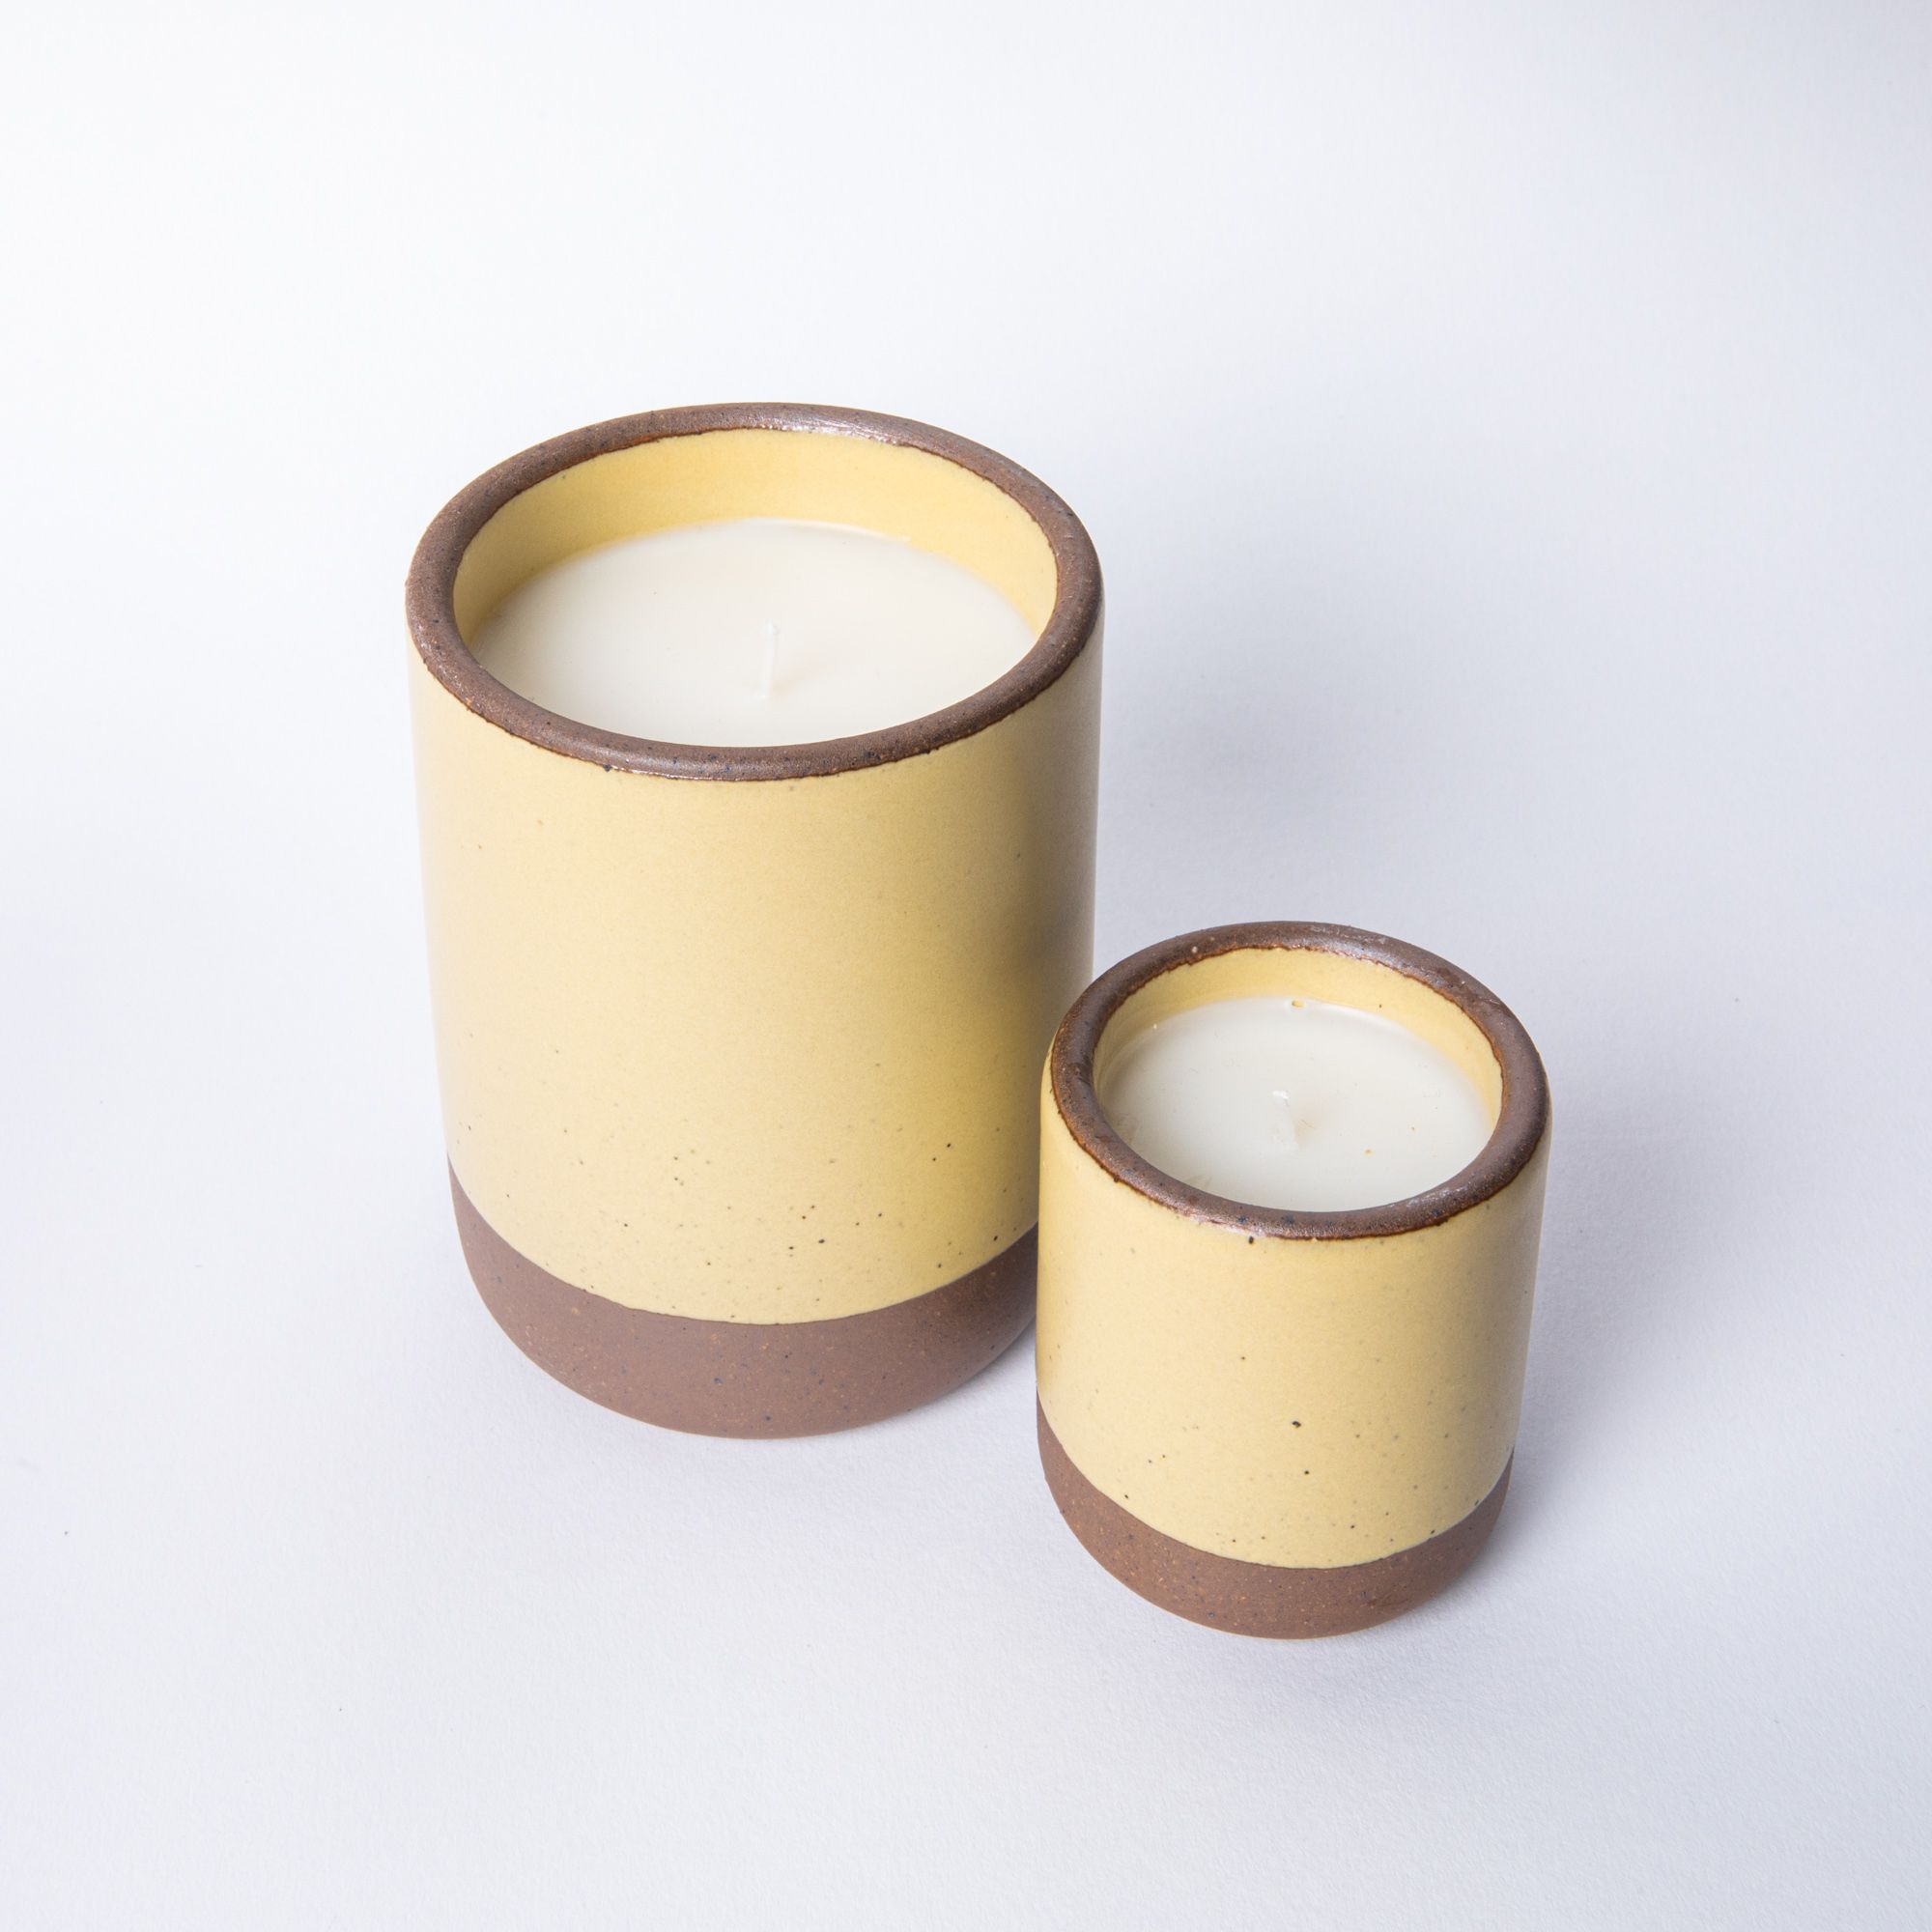 A large and small ceramic vessel in soft butter yellow color with candle inside